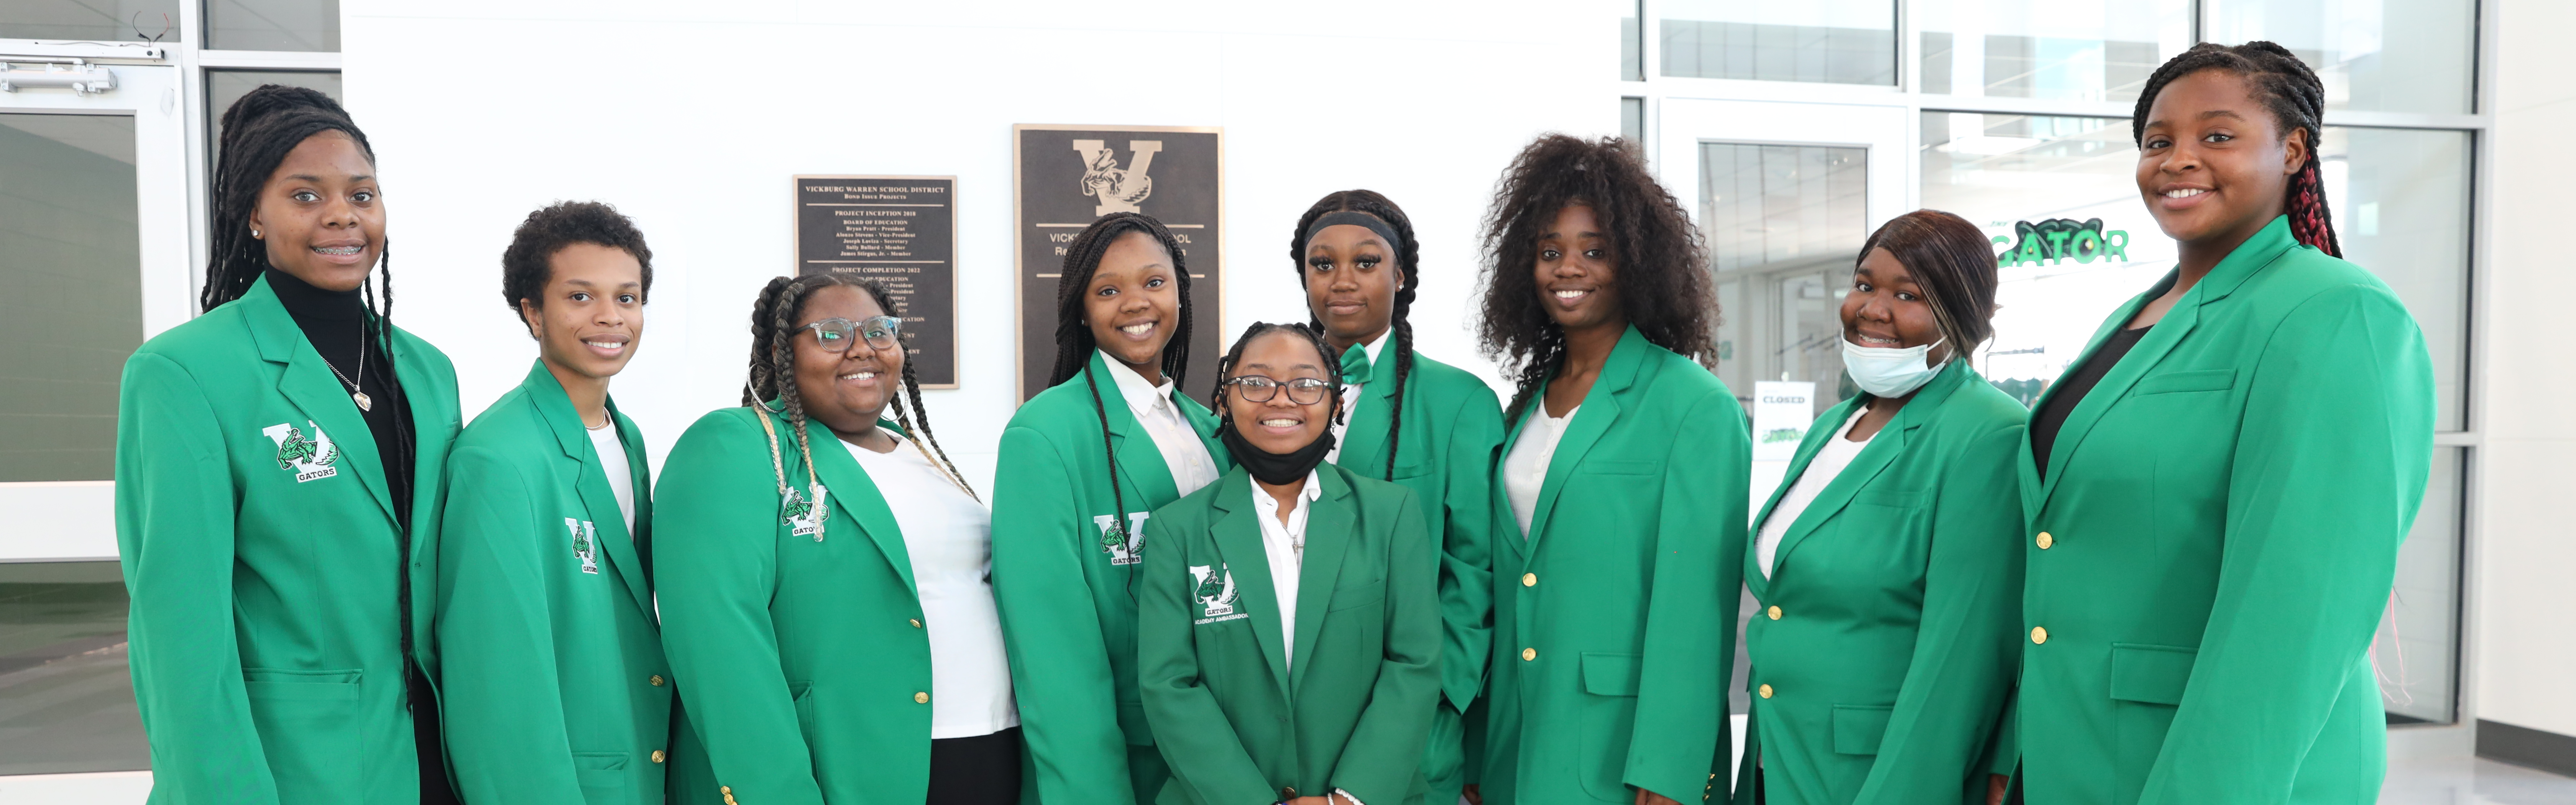 Nine high school students are posing for a photo while wearing green blazers and black bottoms.